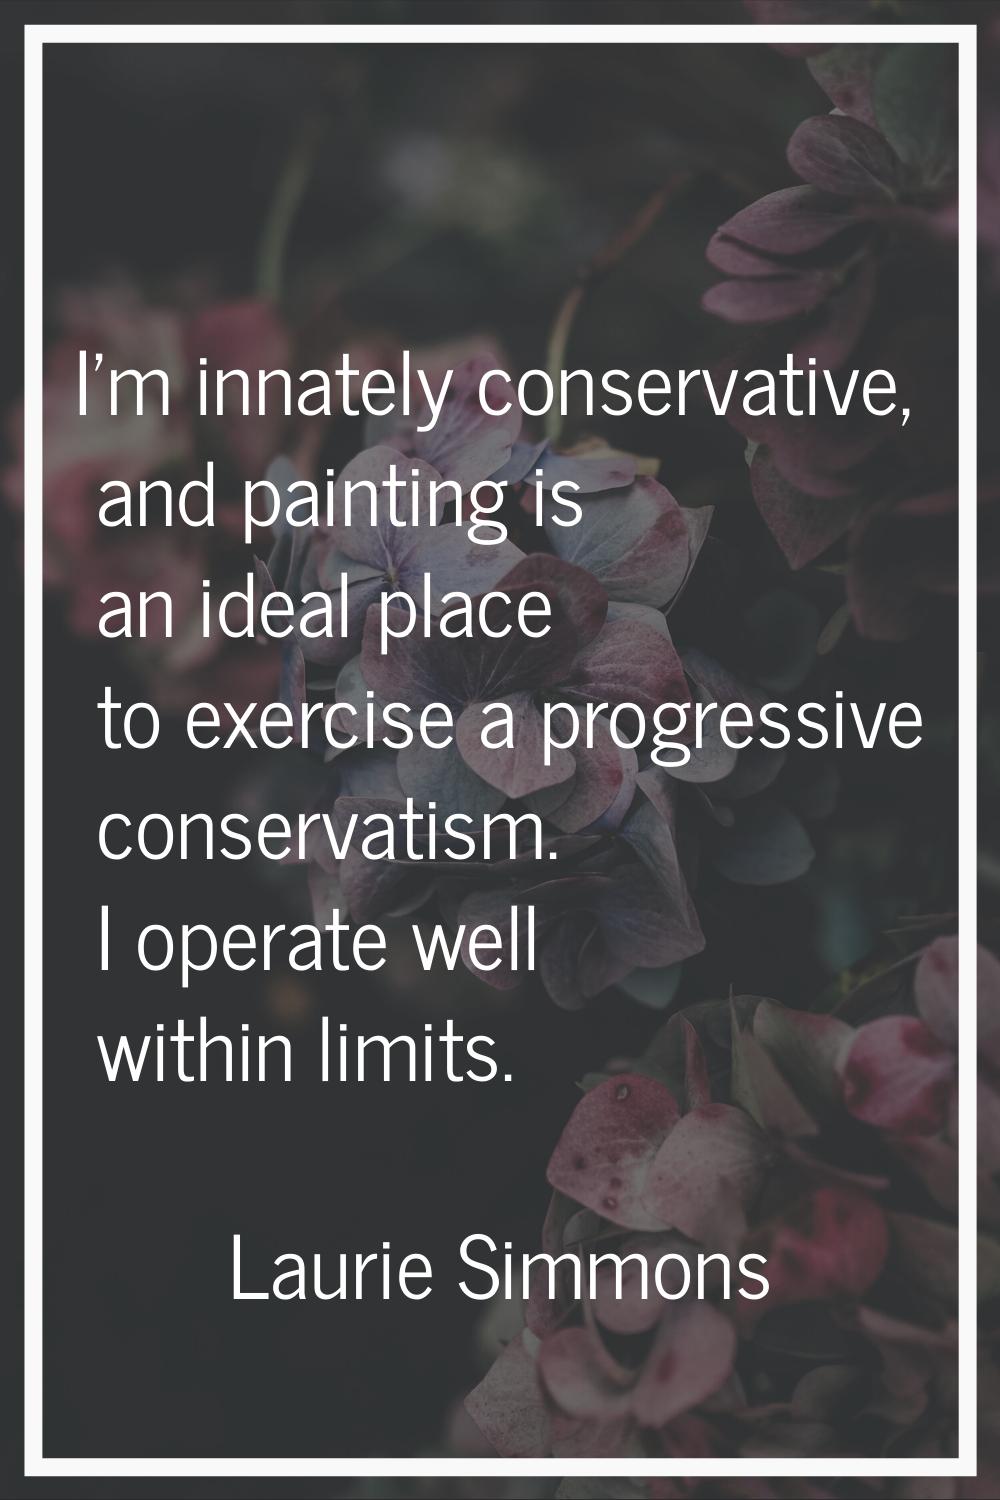 I'm innately conservative, and painting is an ideal place to exercise a progressive conservatism. I